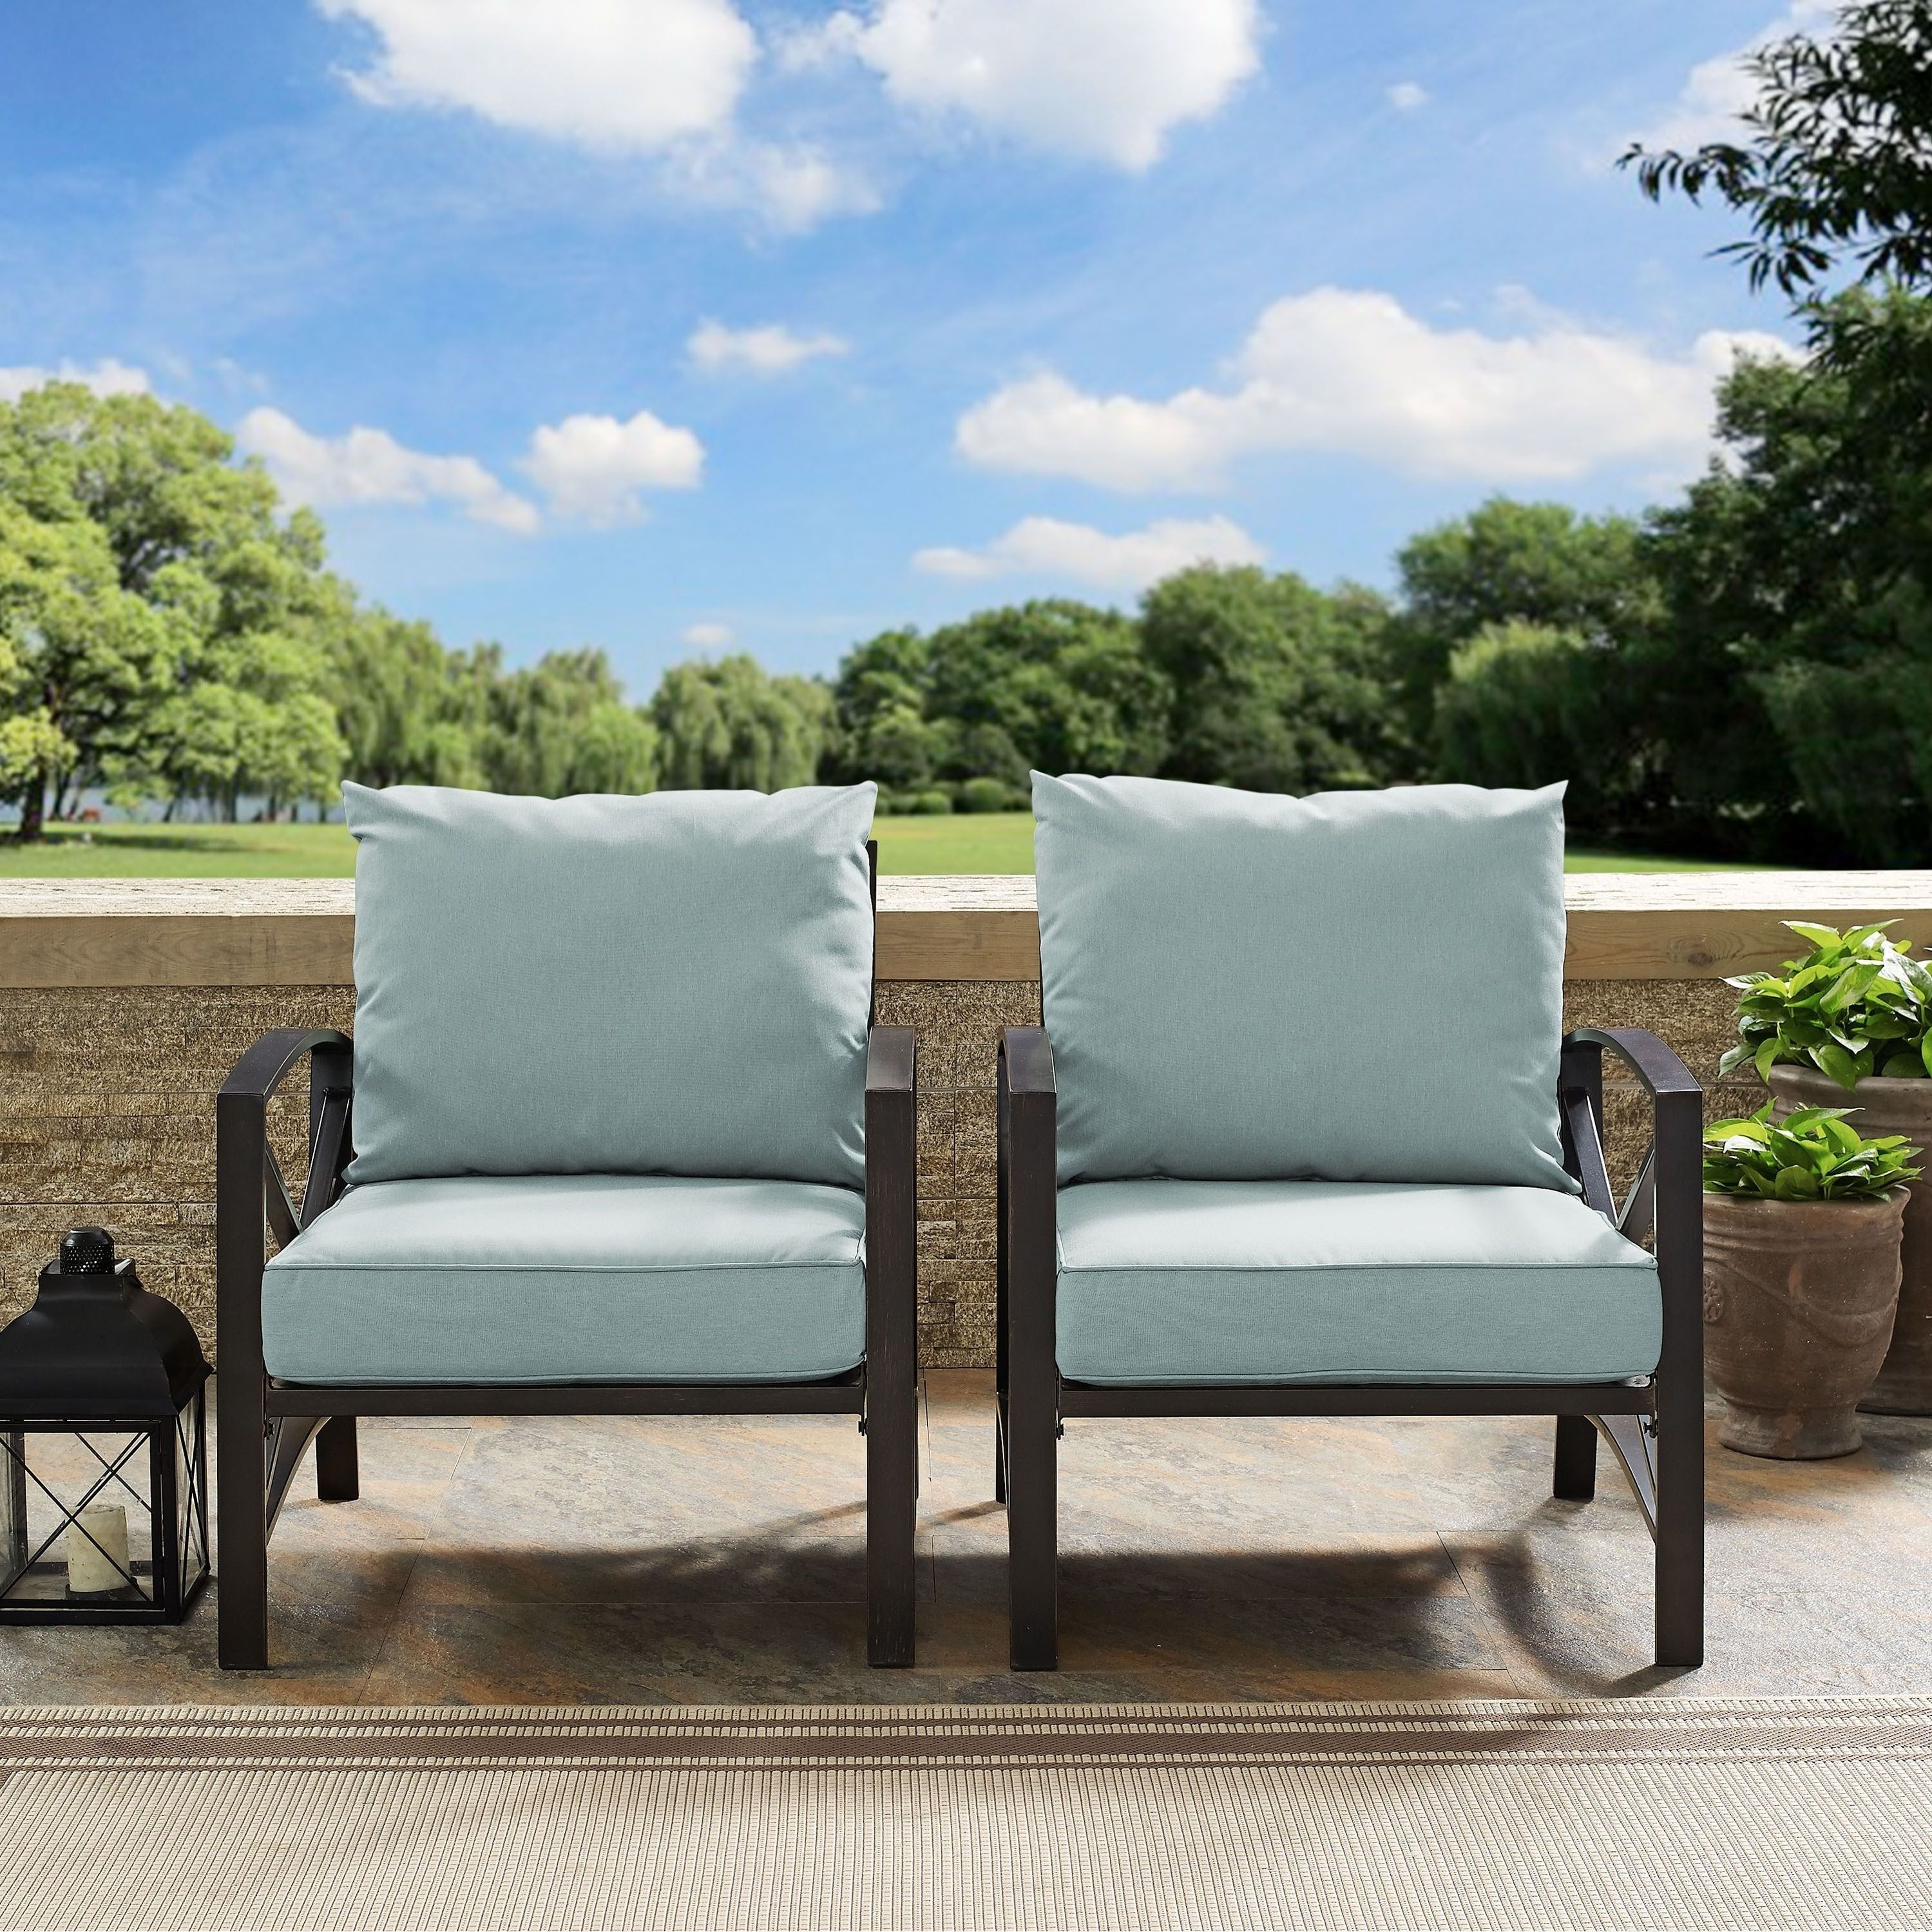 Preferred Crosley Kaplan 2 Pc Outdoor Seating Set With Mist Cushion With Regard To Chaise Lounge Chairs In Bronze With Mist Cushions (View 11 of 25)